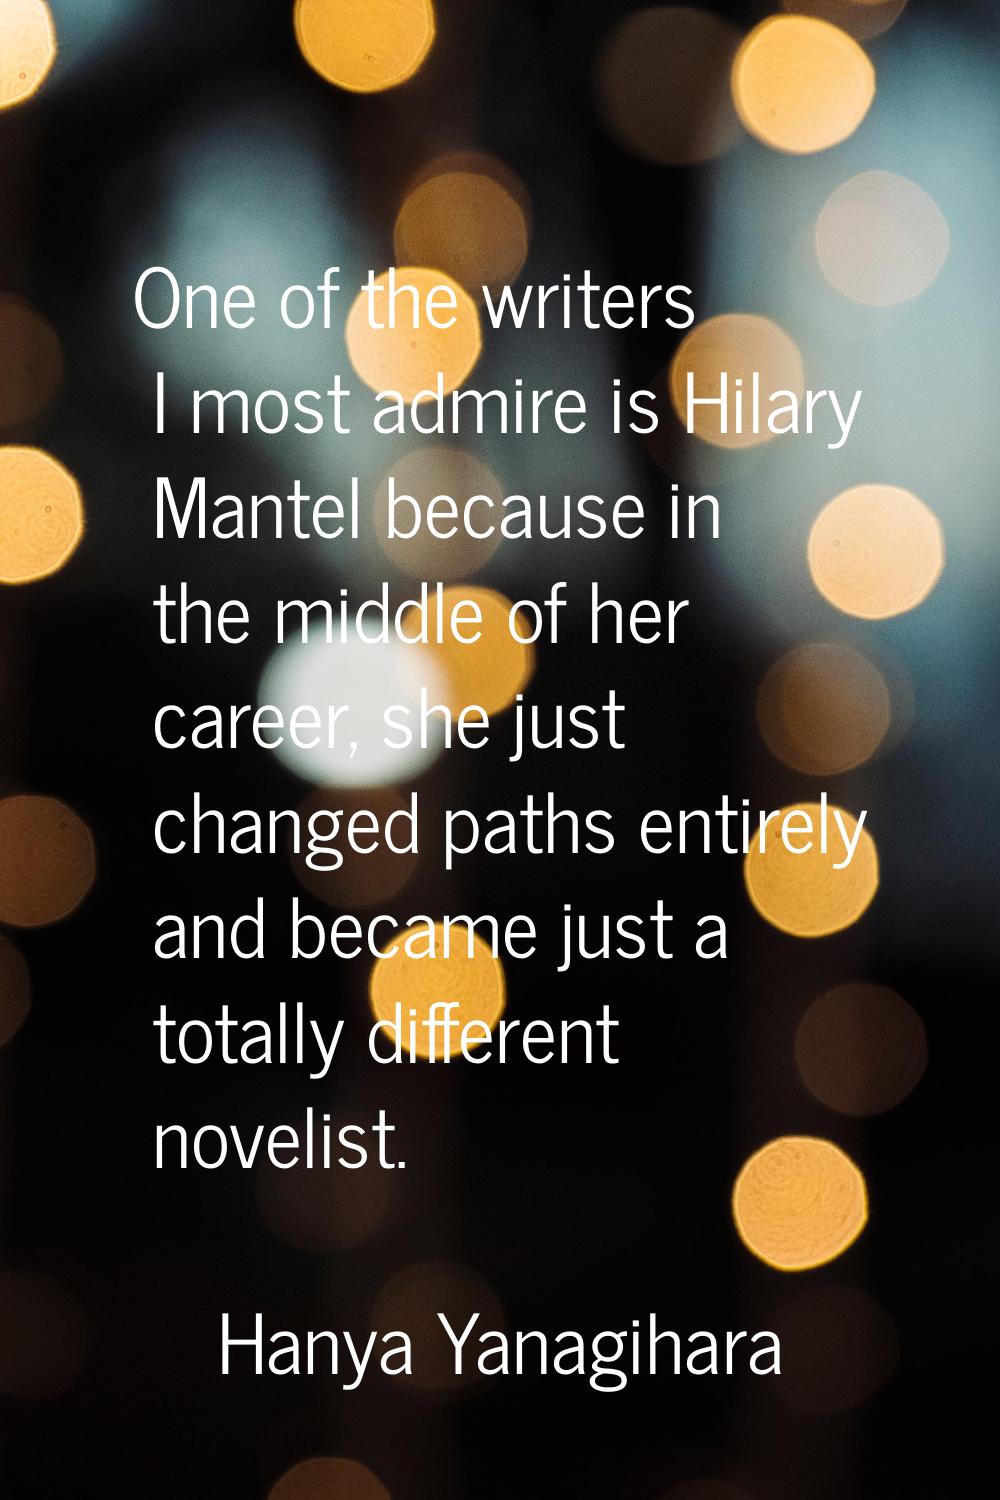 One of the writers I most admire is Hilary Mantel because in the middle of her career, she just cha